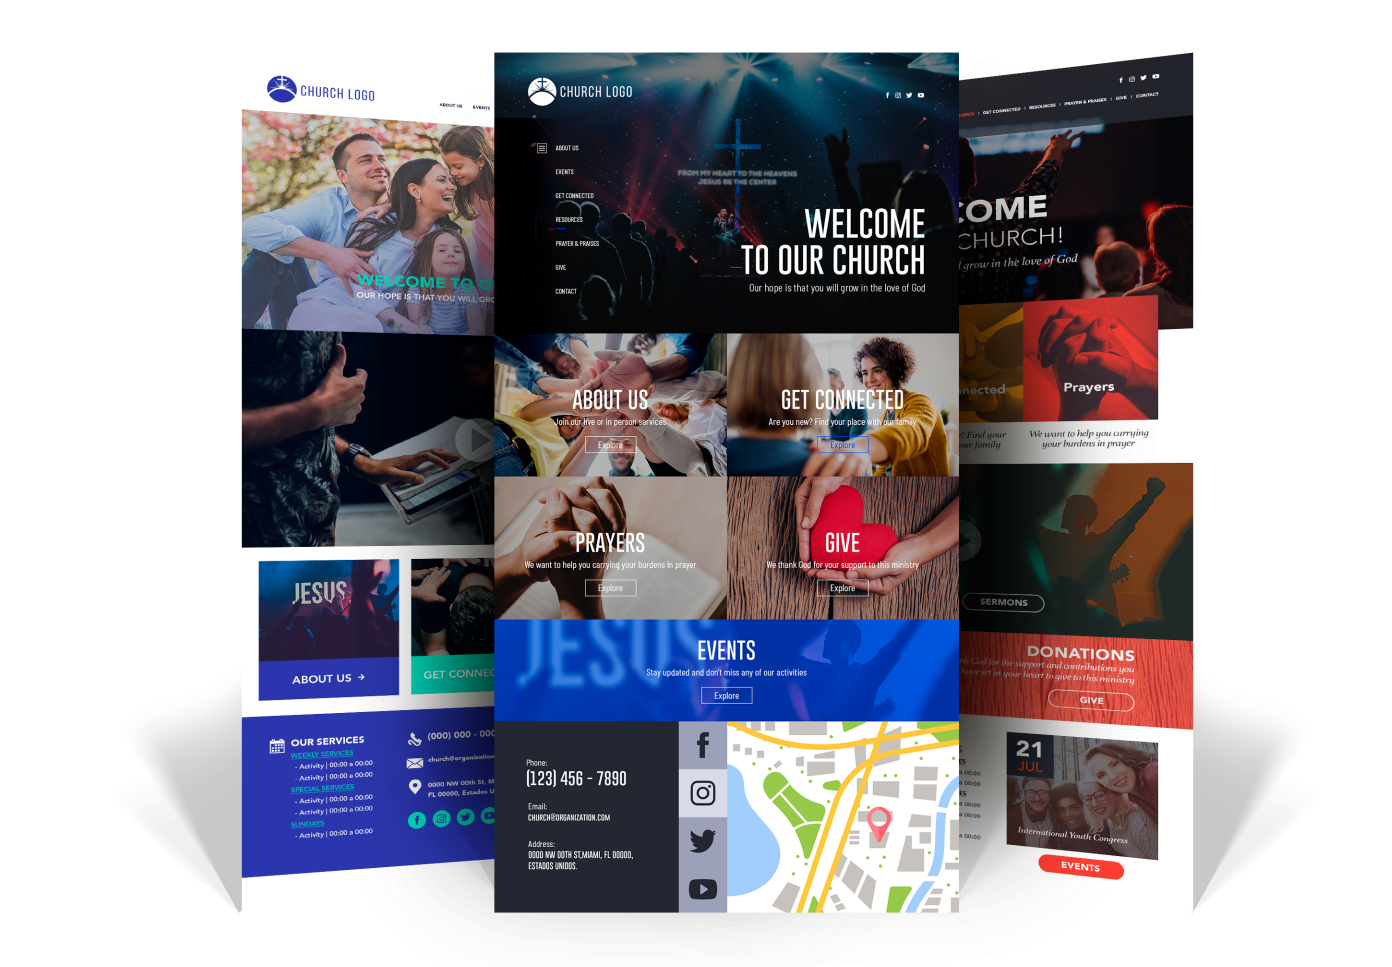 We have created our own website design templates for churches and ministries.